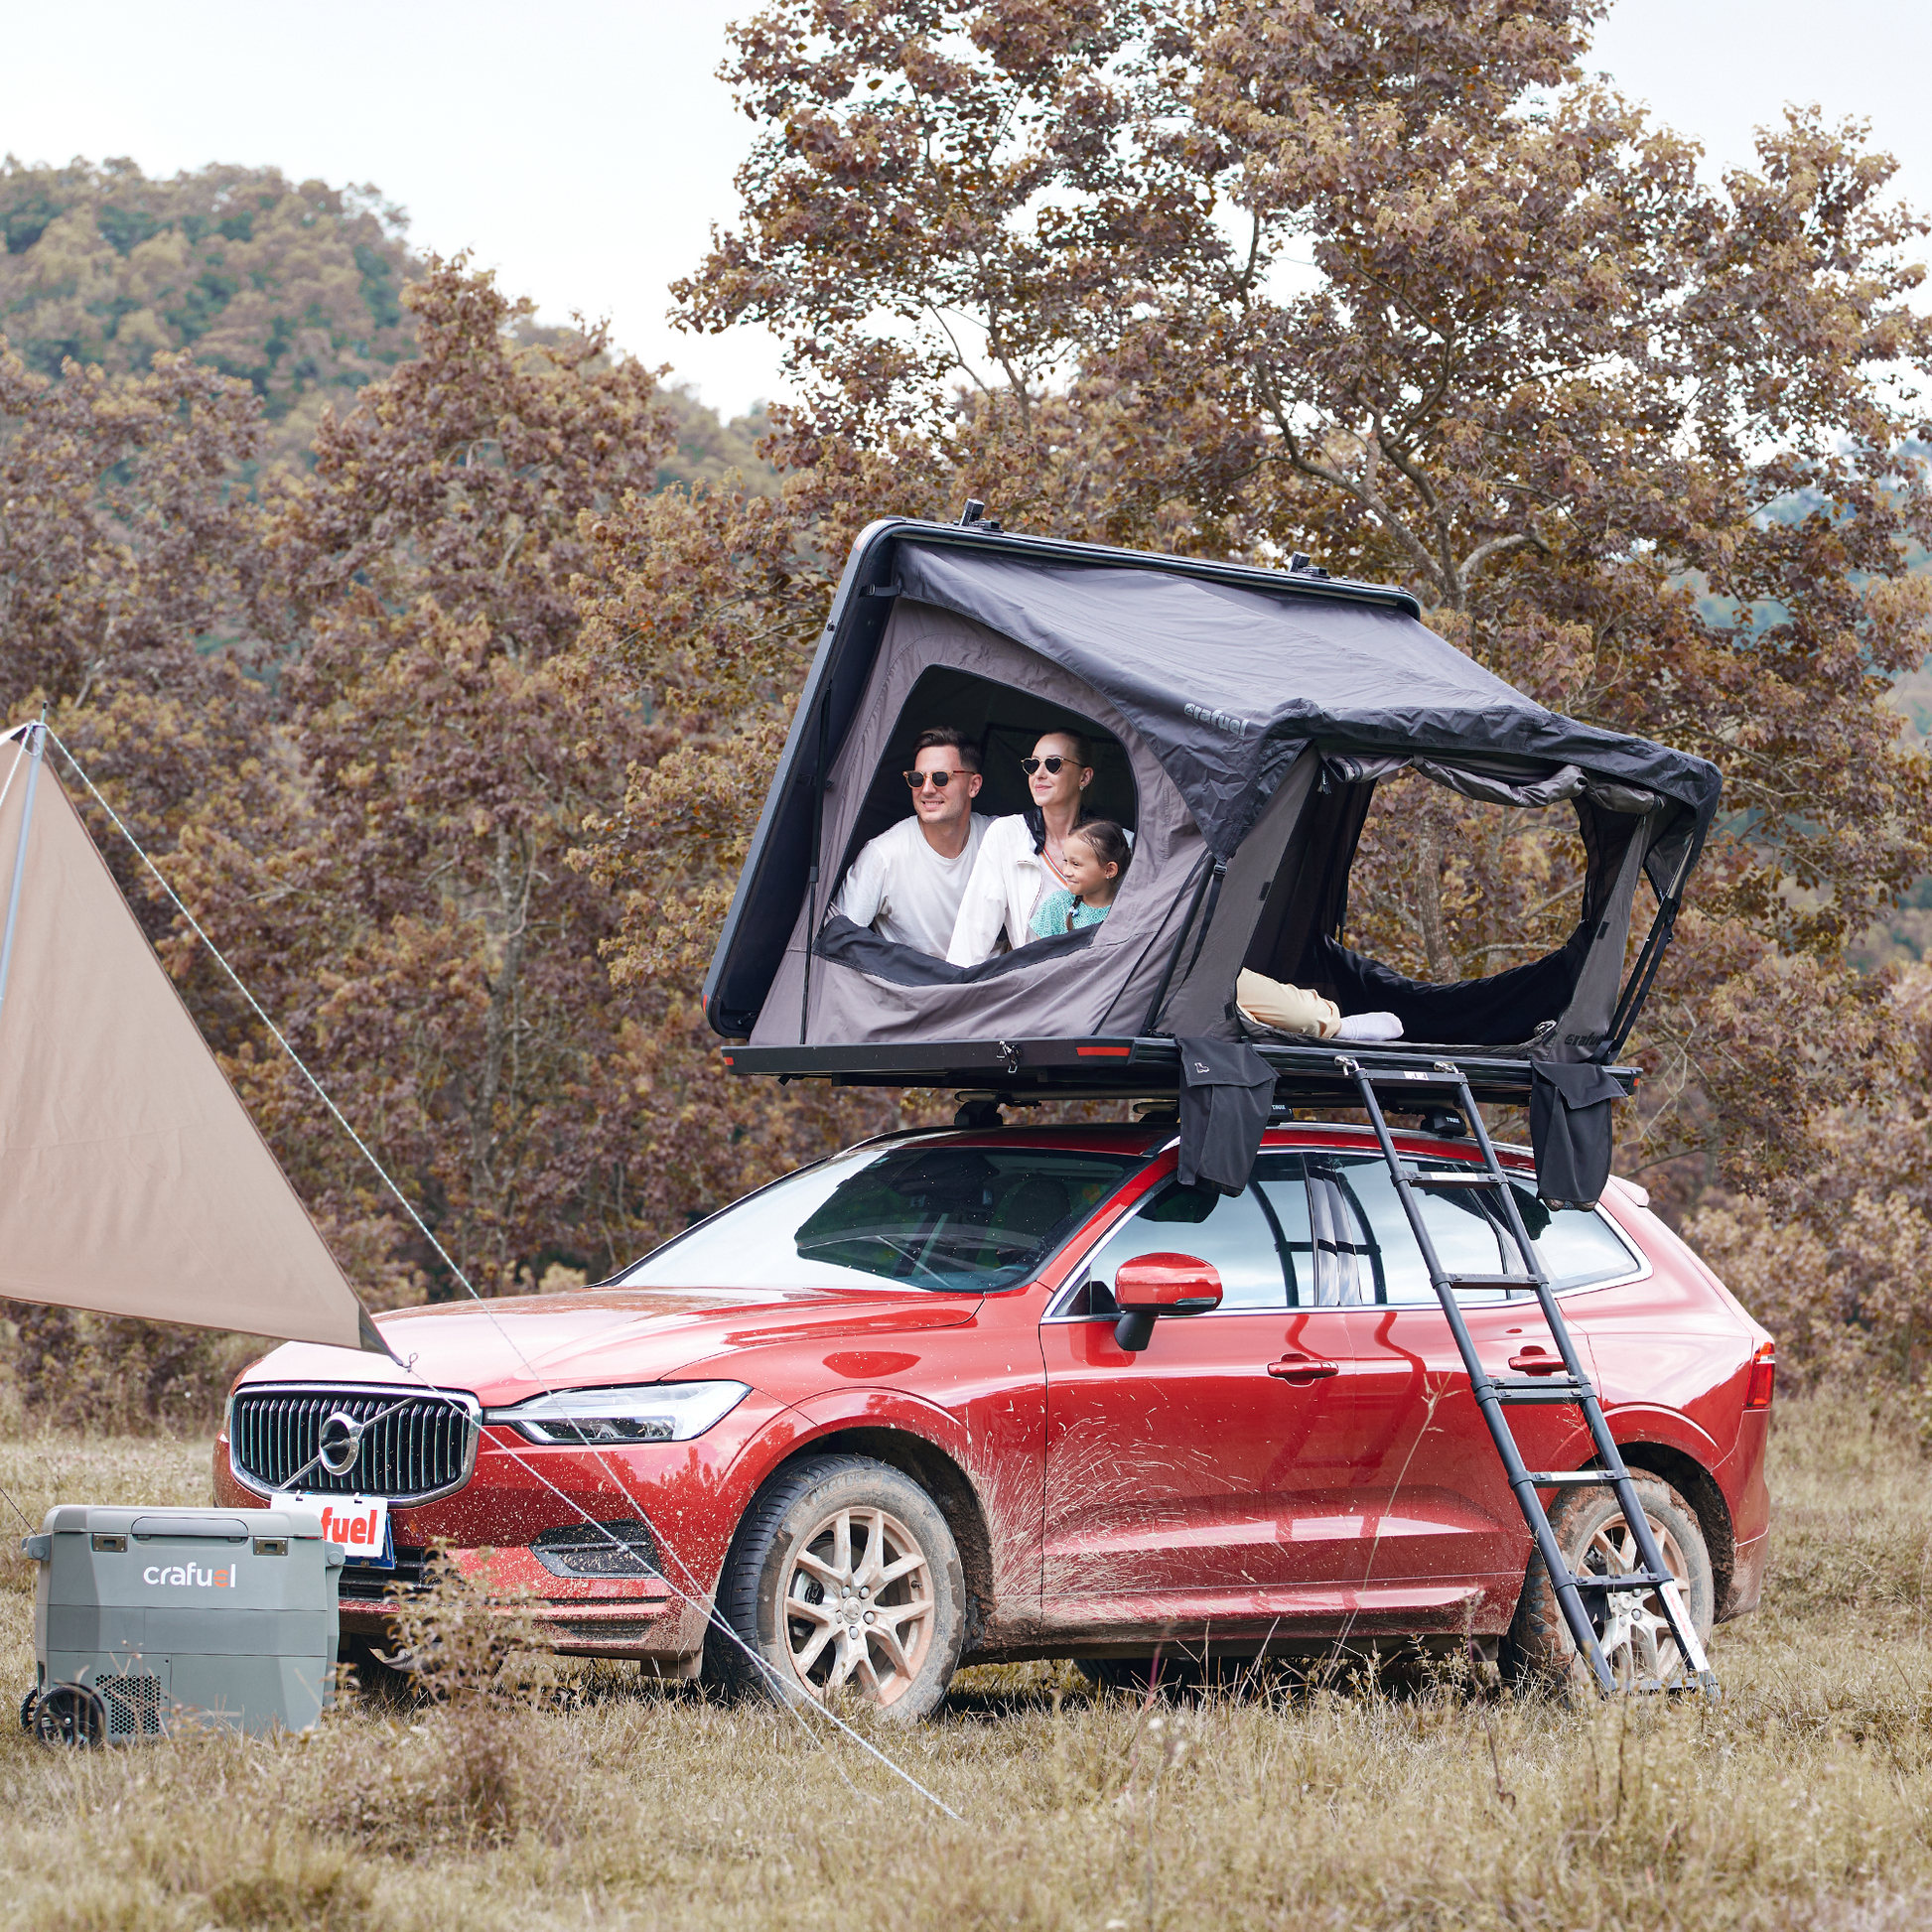 Clever hardshell rooftop tent doubles as a breezy cabana with a view